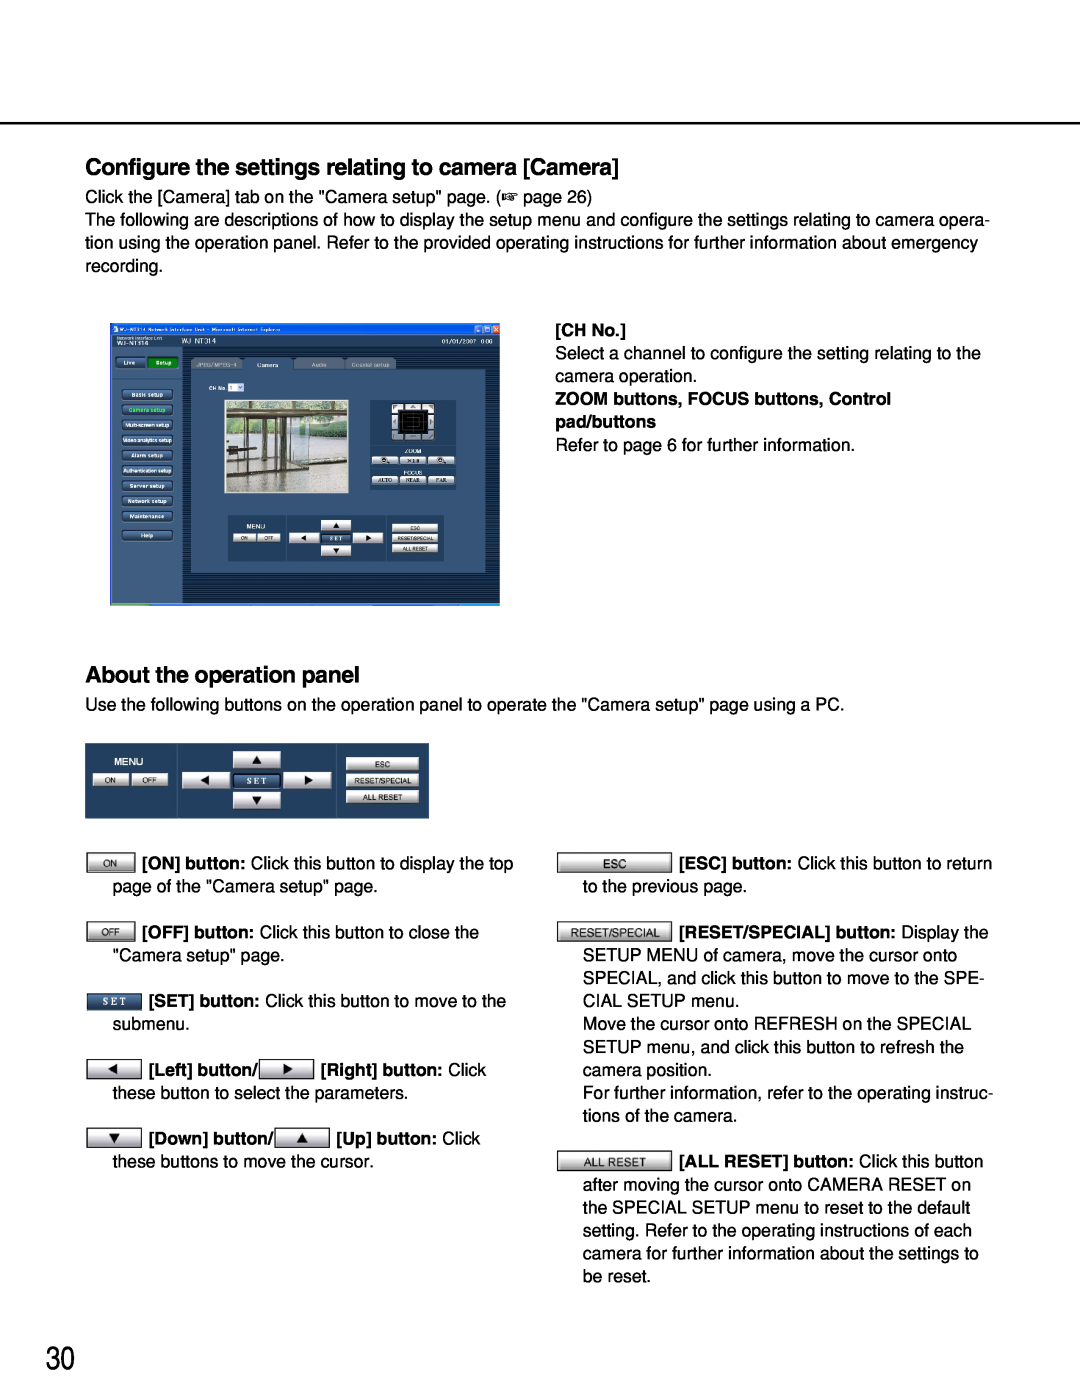 Panasonic WJ-NT314 manual Configure the settings relating to camera Camera, About the operation panel, CH No 